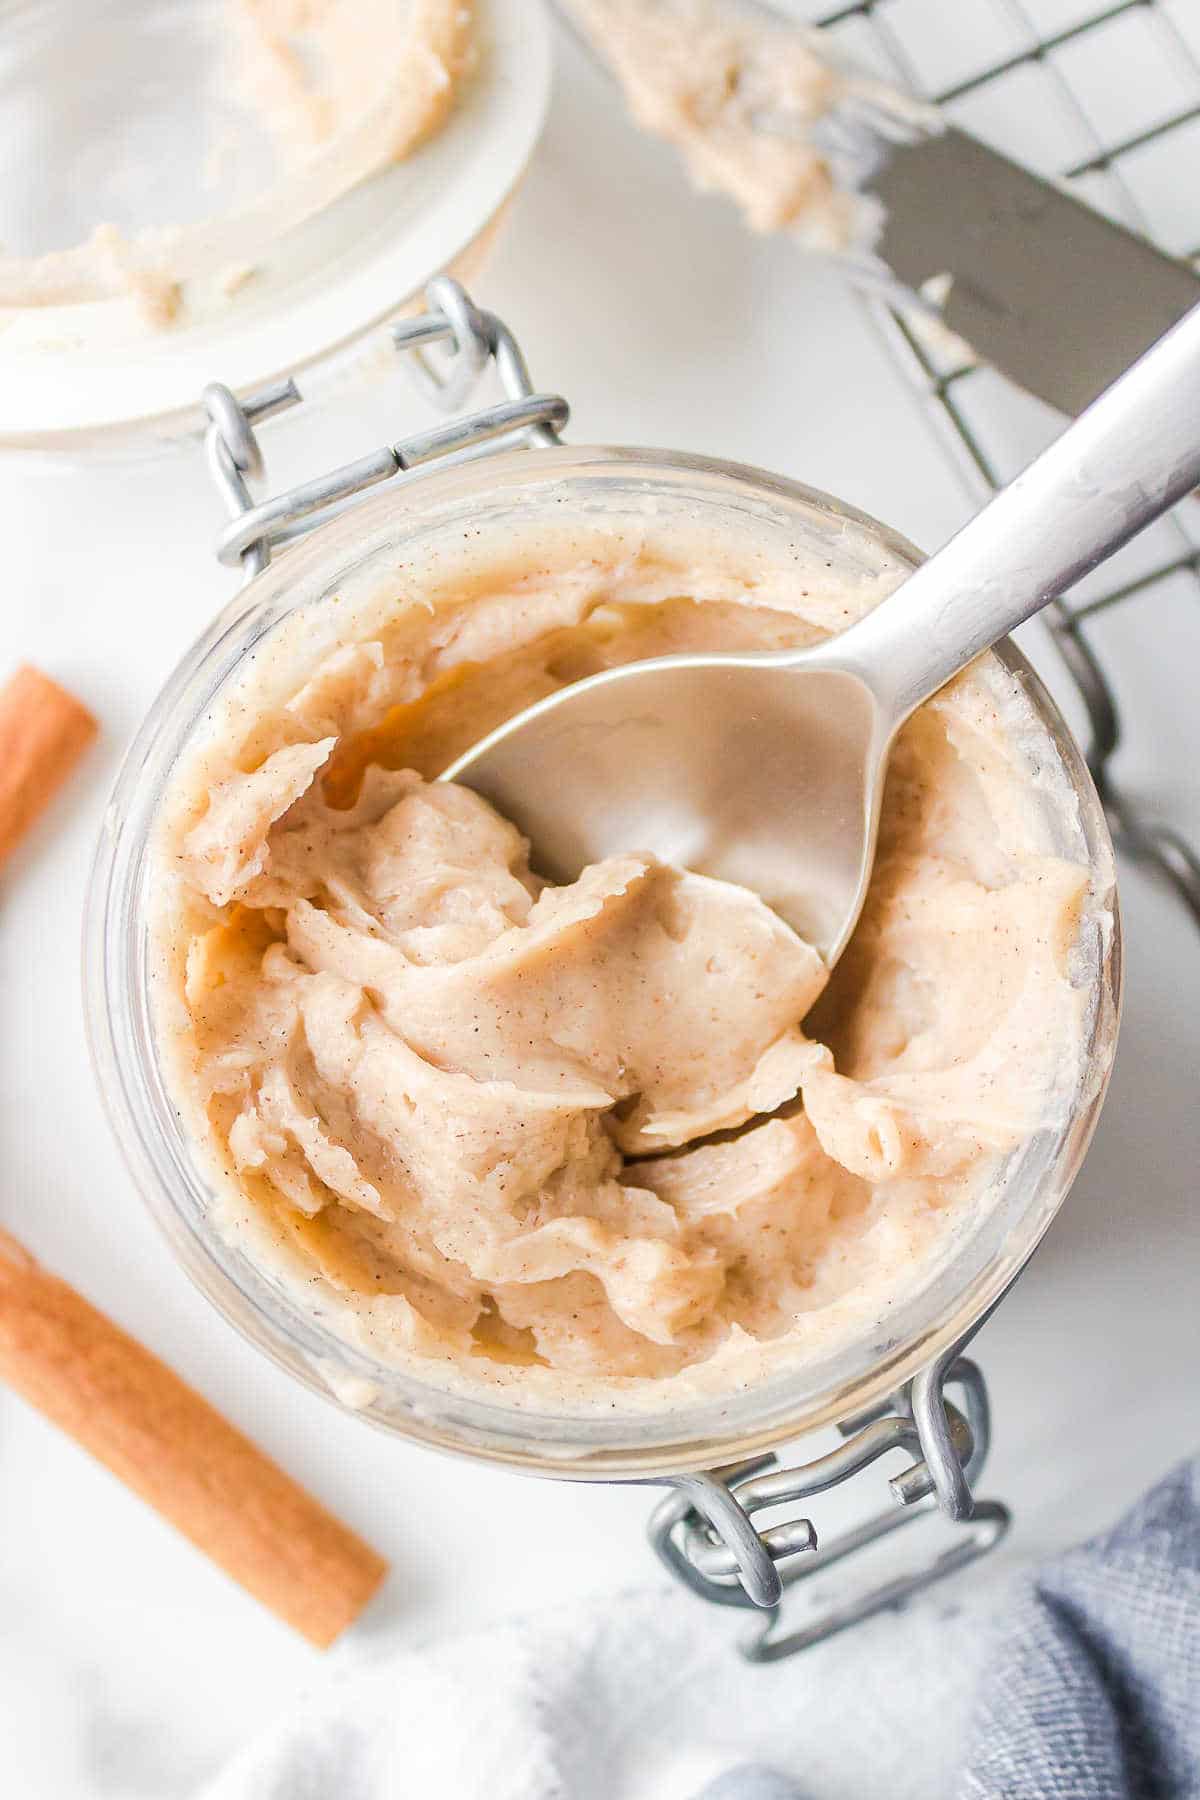 A silver spoon in a jar of Texas Roadhouse cinnamon butter.